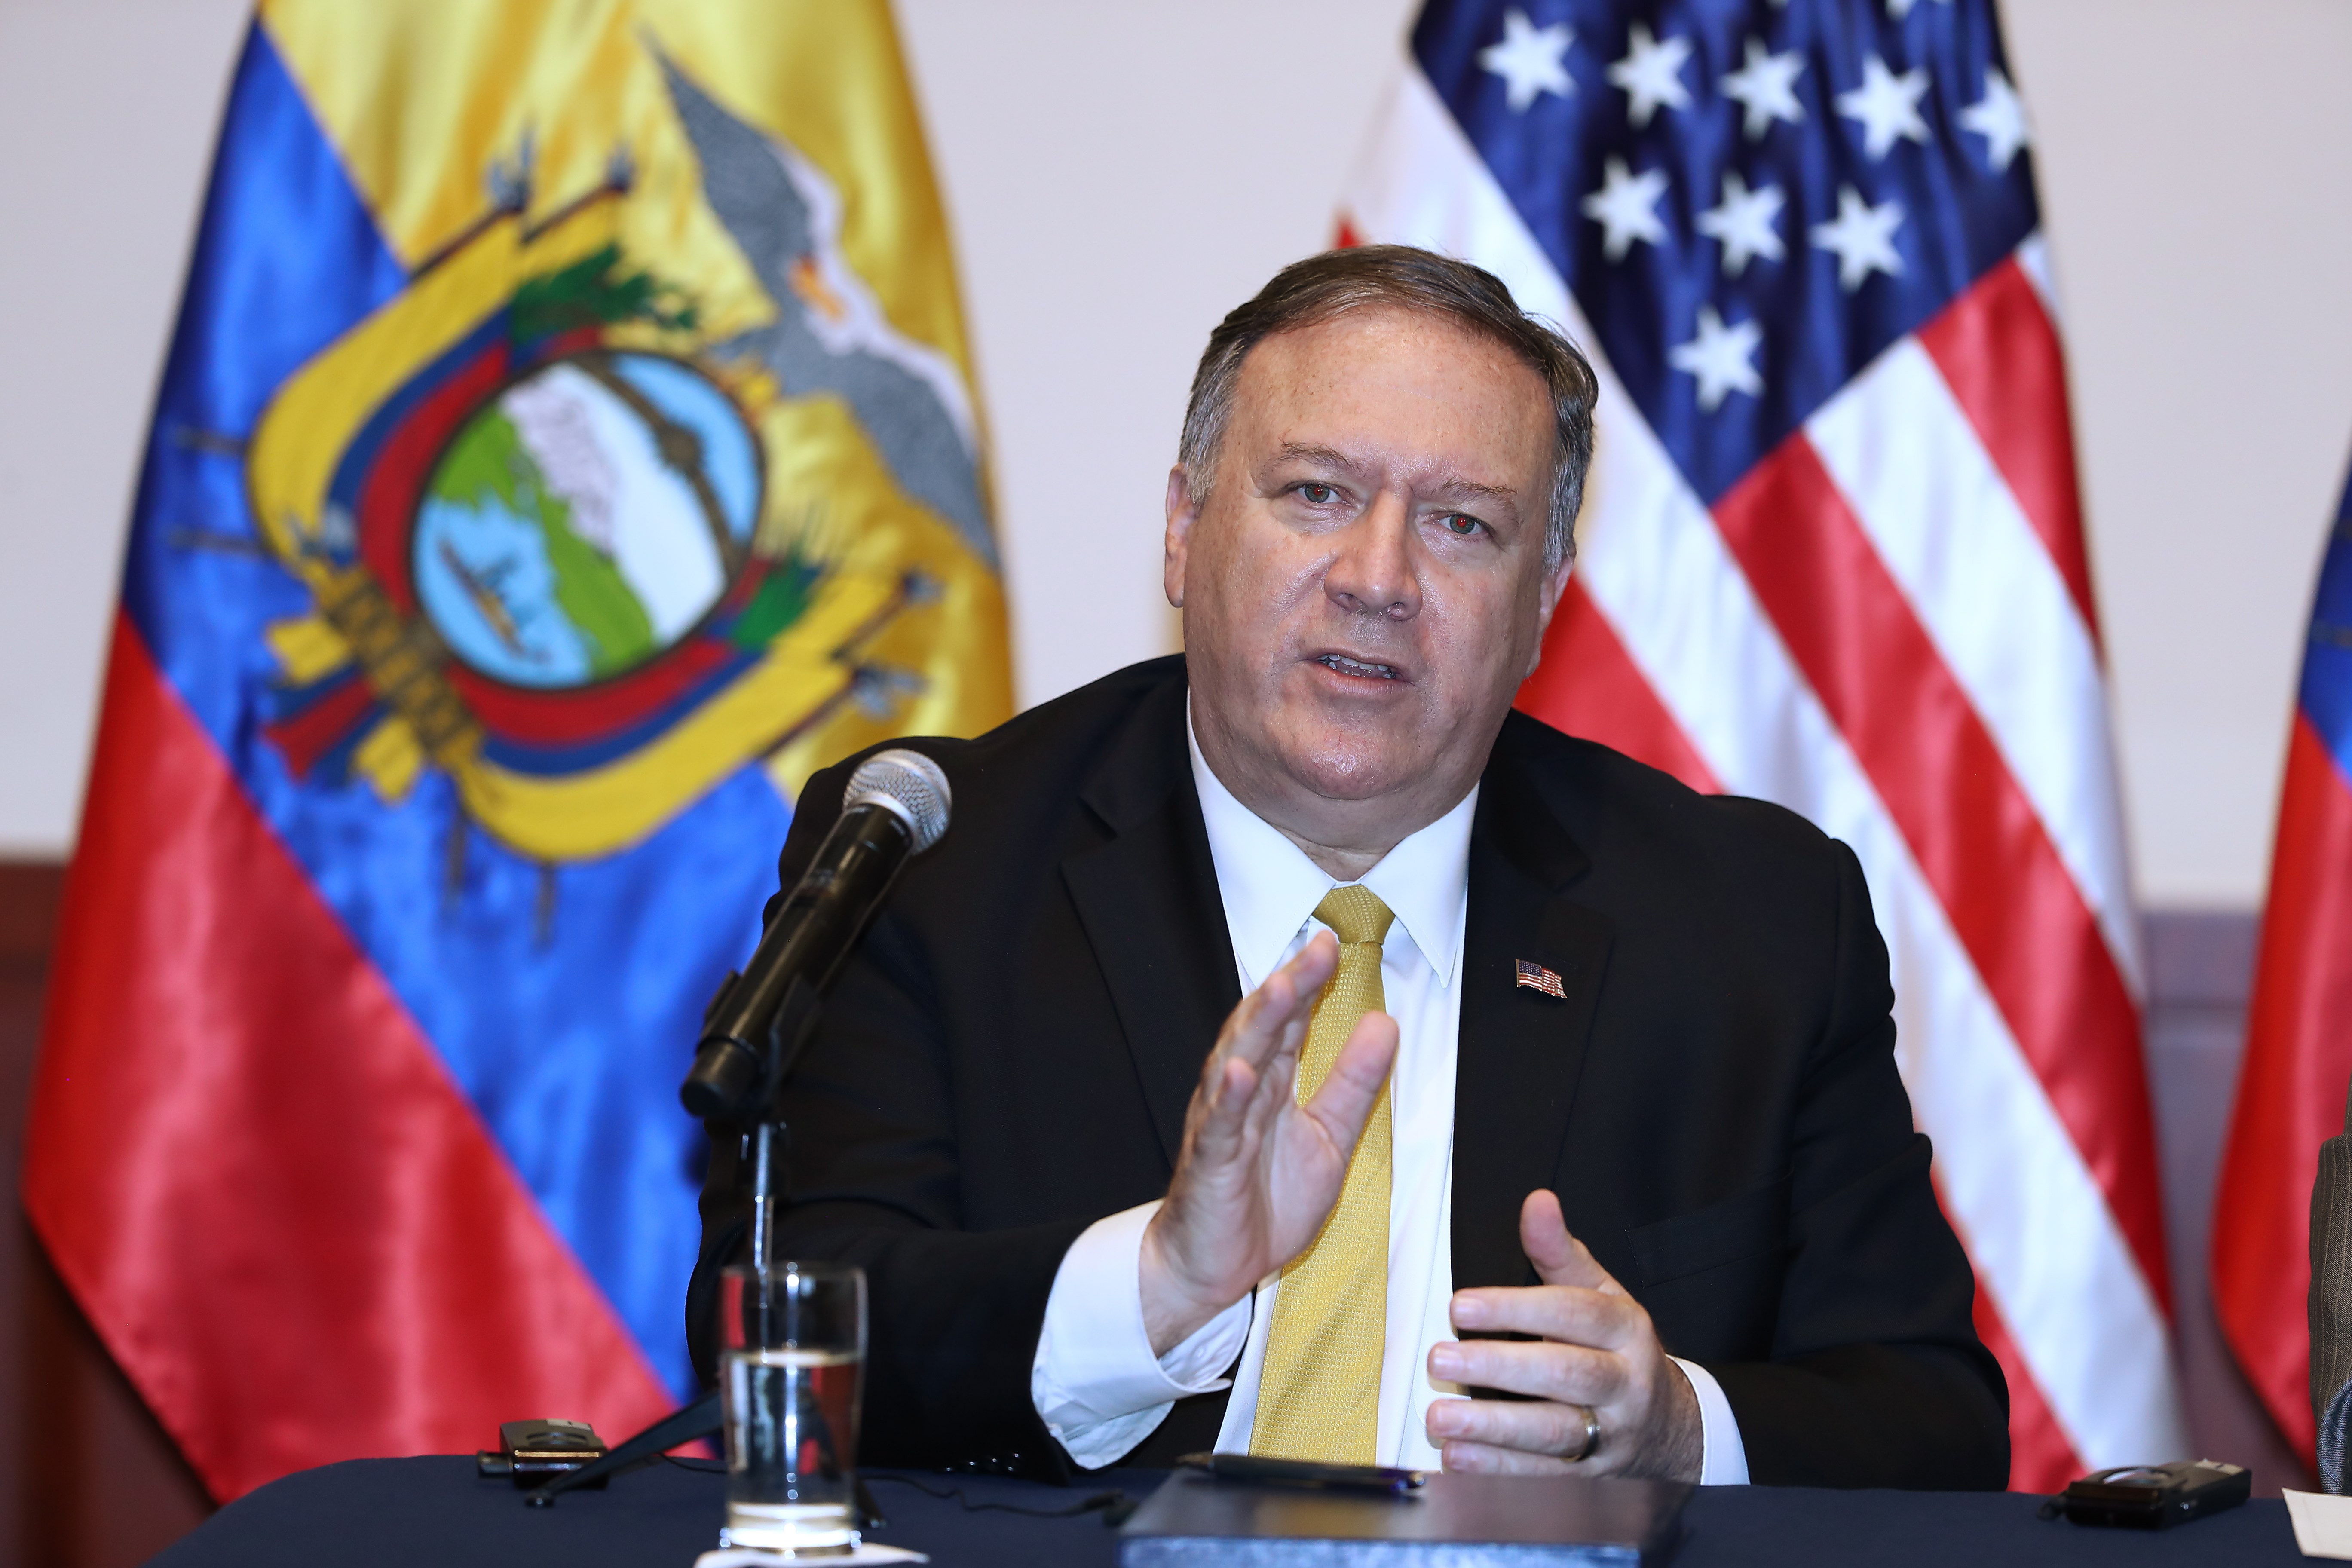 epa07730243 US Secretary of State Mike Pompeo speaks during a joint press conference with Ecuadorian President Lenin Moreno (not pictured) in Guayaquil, Ecuador, 20 July 2019. Pompeo visits Ecuador as part of his tour of Latin America to strengthen alliances in the Western Hemisphere on regional and global challenges.  EPA/JOSE JACOME